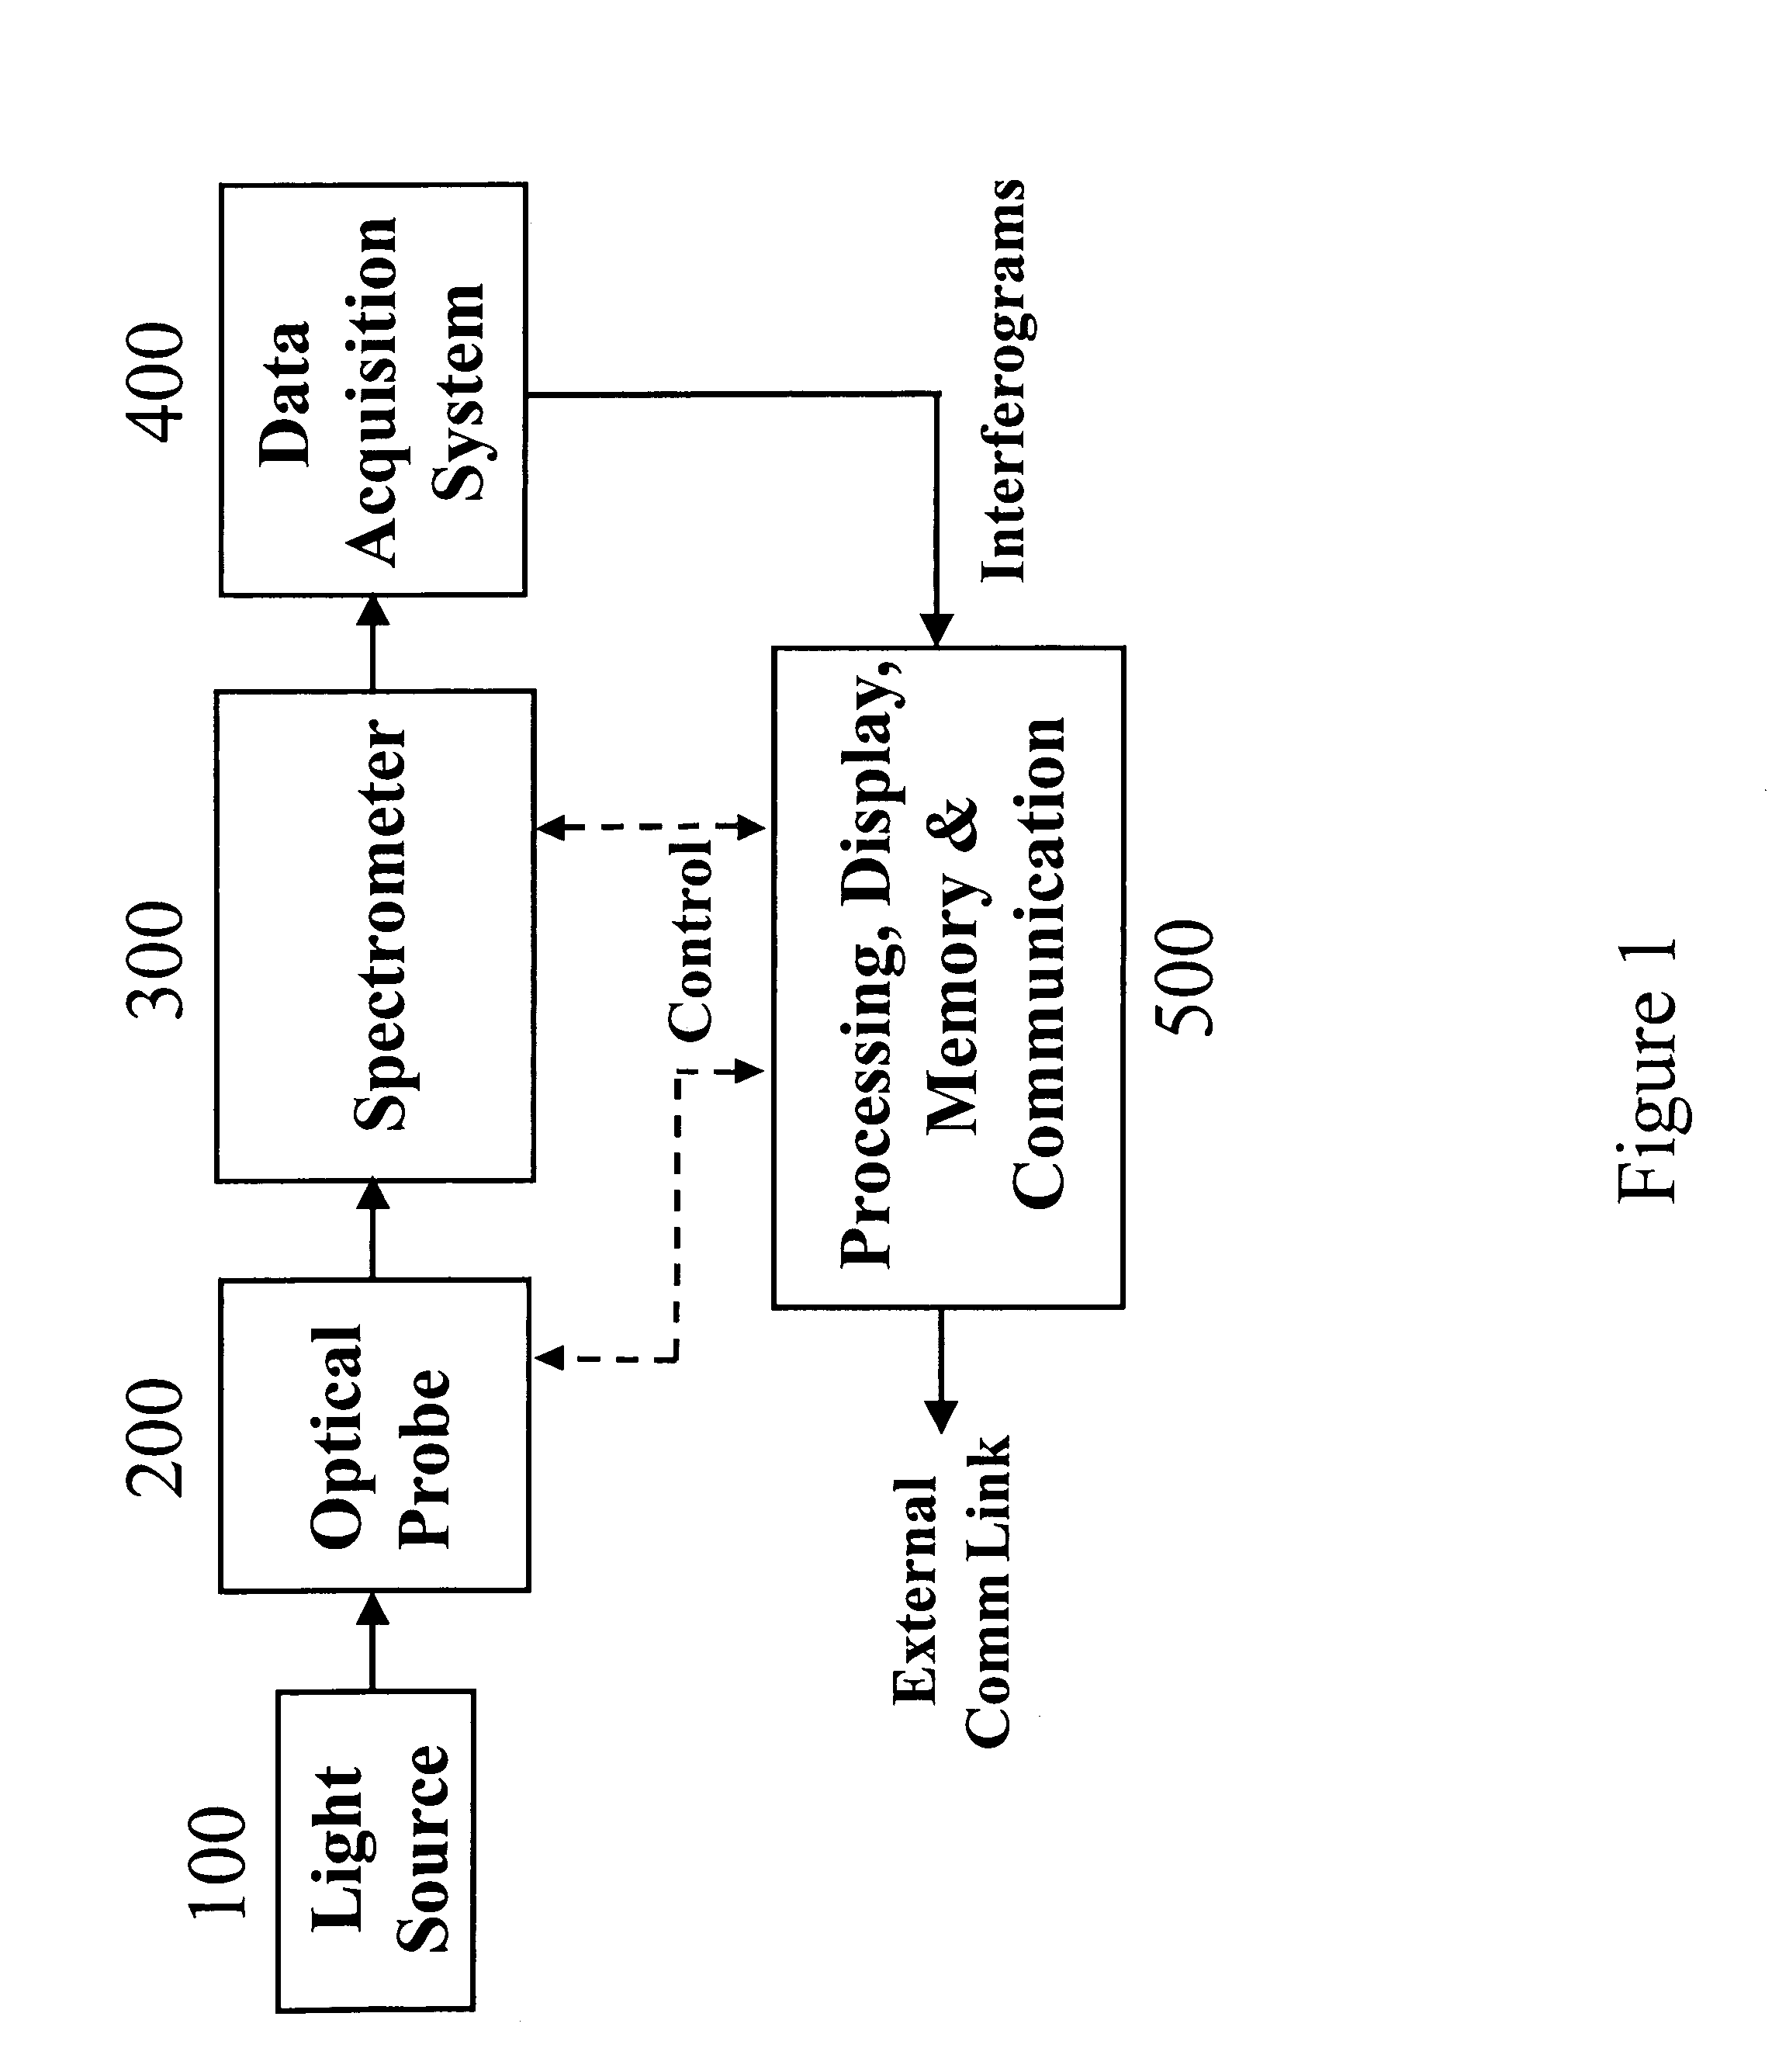 Method of making optical probes for non-invasive analyte measurements